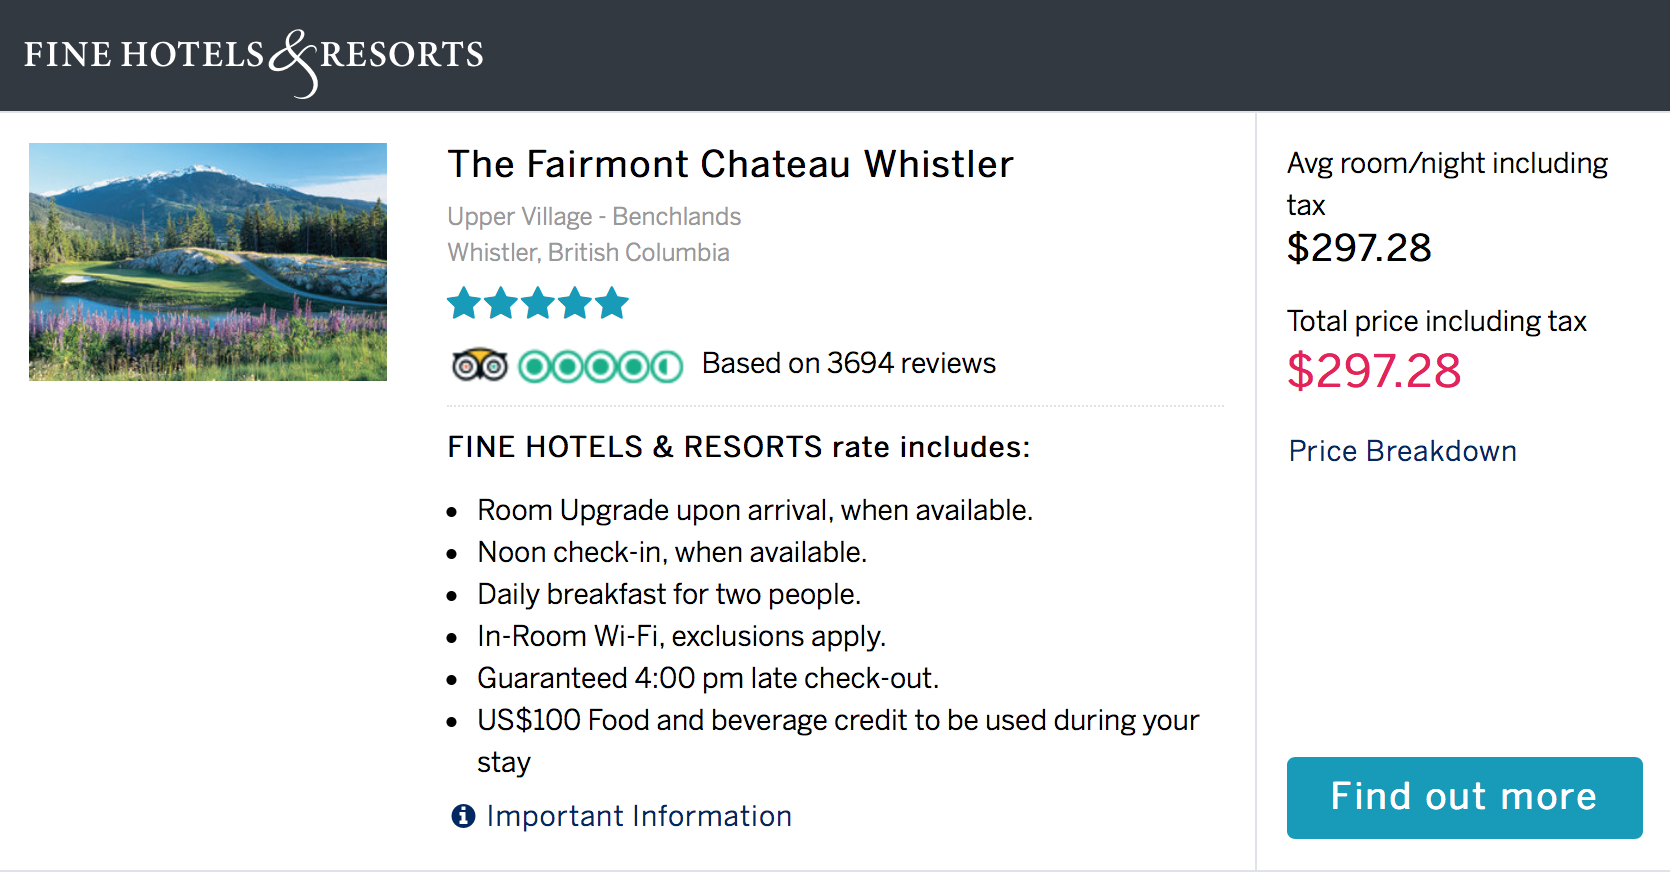 Fairmont Chateai Whistler - American Express Fine Hotels And Resorts Rate